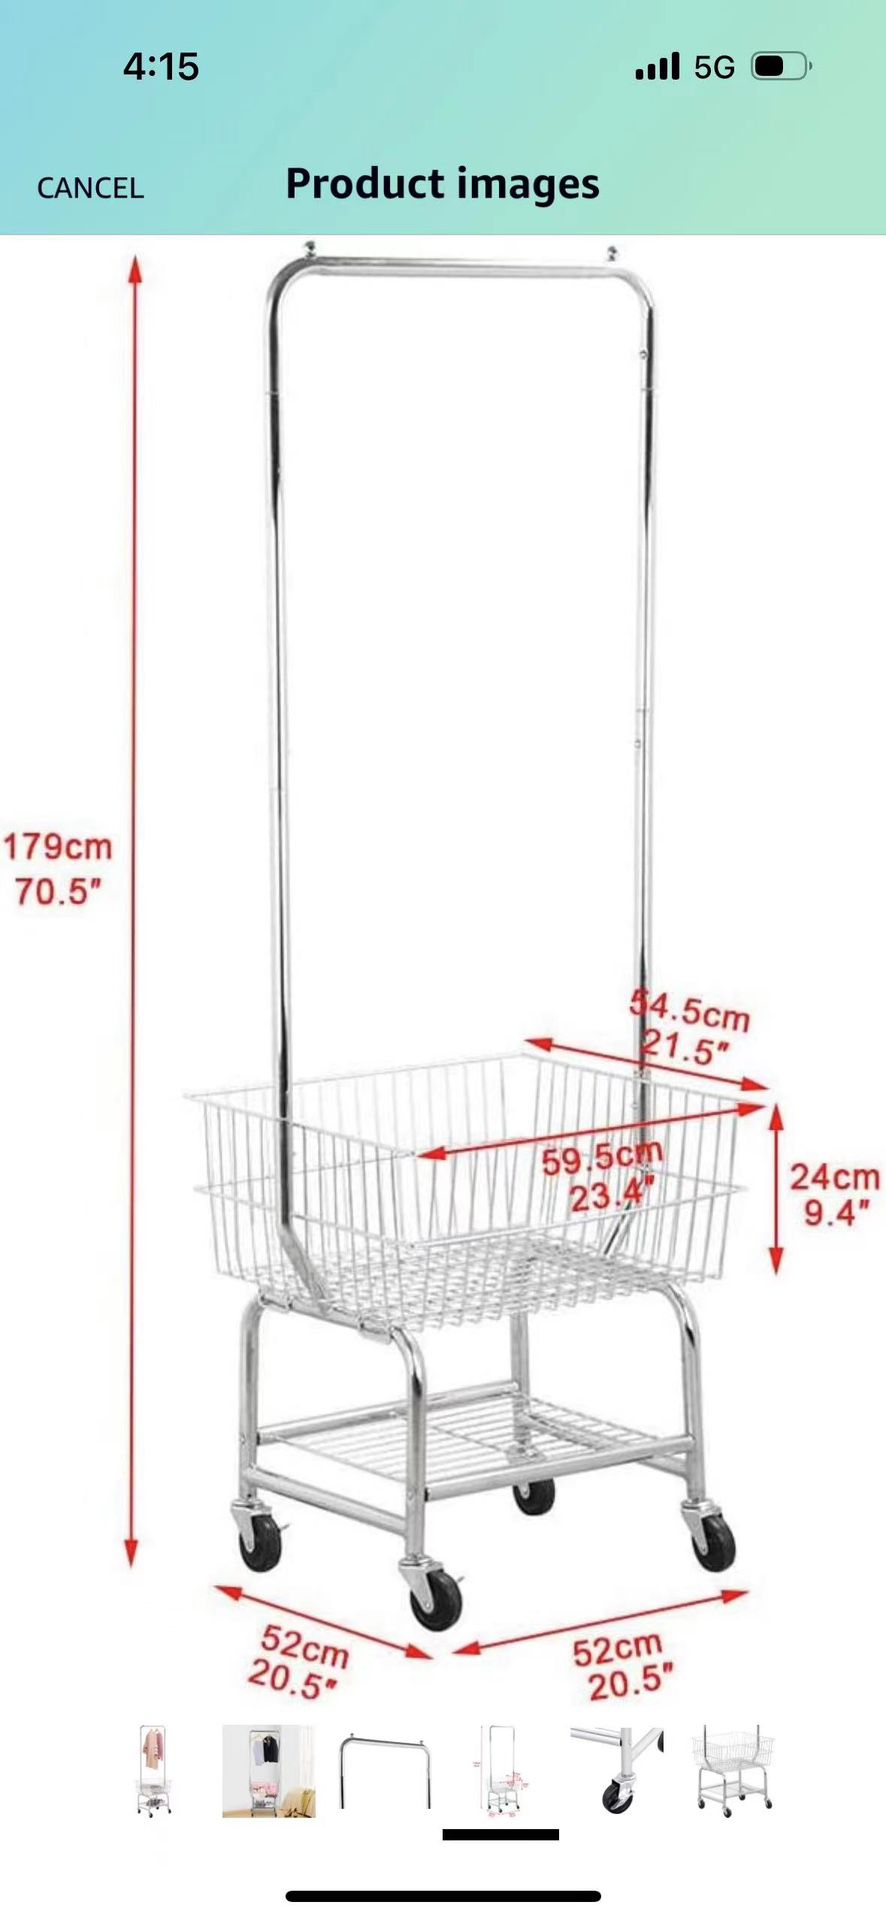 Wire Commercial Rolling Laundry Cart Bulter Garment Rack,Laundry Butler Storage Rack,w/Hanging Drying Rack Wash Basket/Bag Mesh Collapsible Racks on W